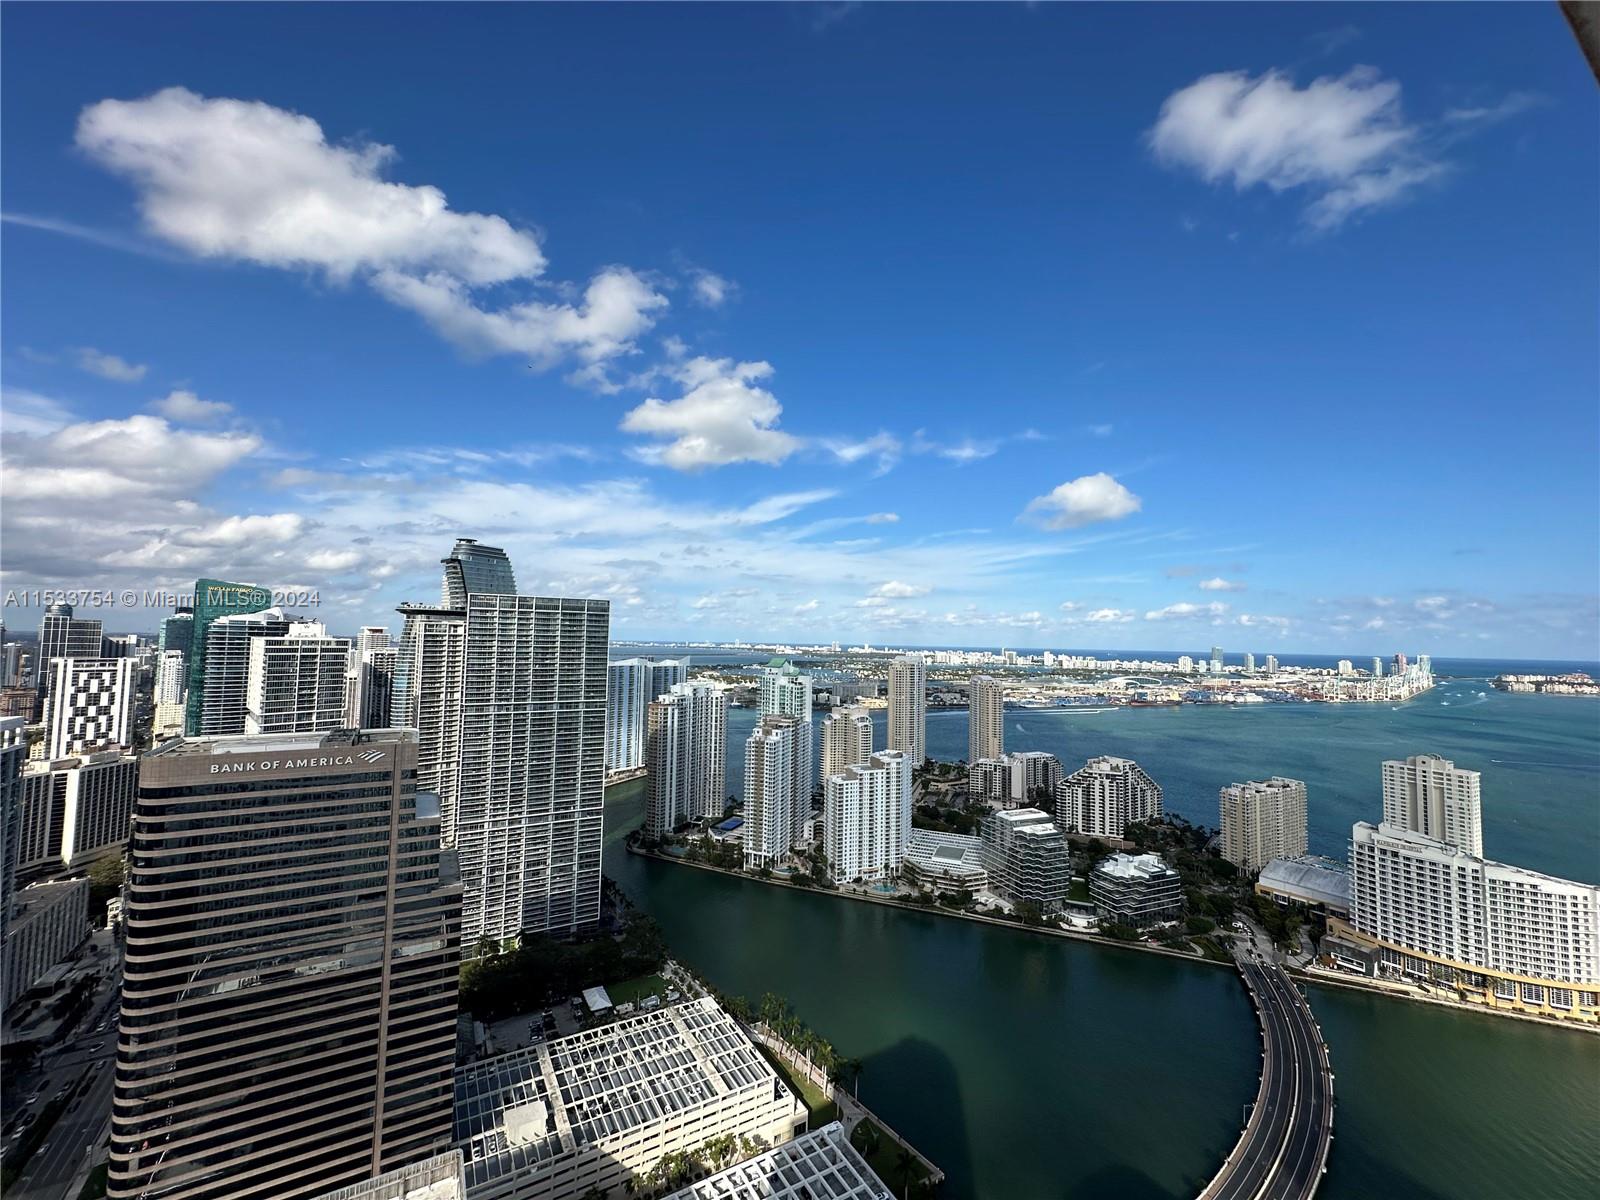 Enjoy this gorgeous 1bd/1bath Penthouse unit located at the PLAZA on BRICKELL with the most amazing breathtaking view from the 54th fl facing towards Biscayne Bay,Brickell Key and Miami Beach where holiday fireworks are always displayed.Unit features 10ft ceilings,subzero refrigerator & Bosch appliances,renovated Italian kitchen with granite countertop,custom walk-in closet,whirlpool/shower tub,Italian ceramic floors throughout as well as in the balcony.Maintenance fee includes; basic cable and internet in addition to all the amenities that feel like you are in a hotel. The building is in prime location and within a short distance from Mary Brickell Village,Brickell City Centre, & an endless list of restaurants to choose from.Asking for better is impossible!!!WALKTHROUGH VIDEO AVAILABLE.